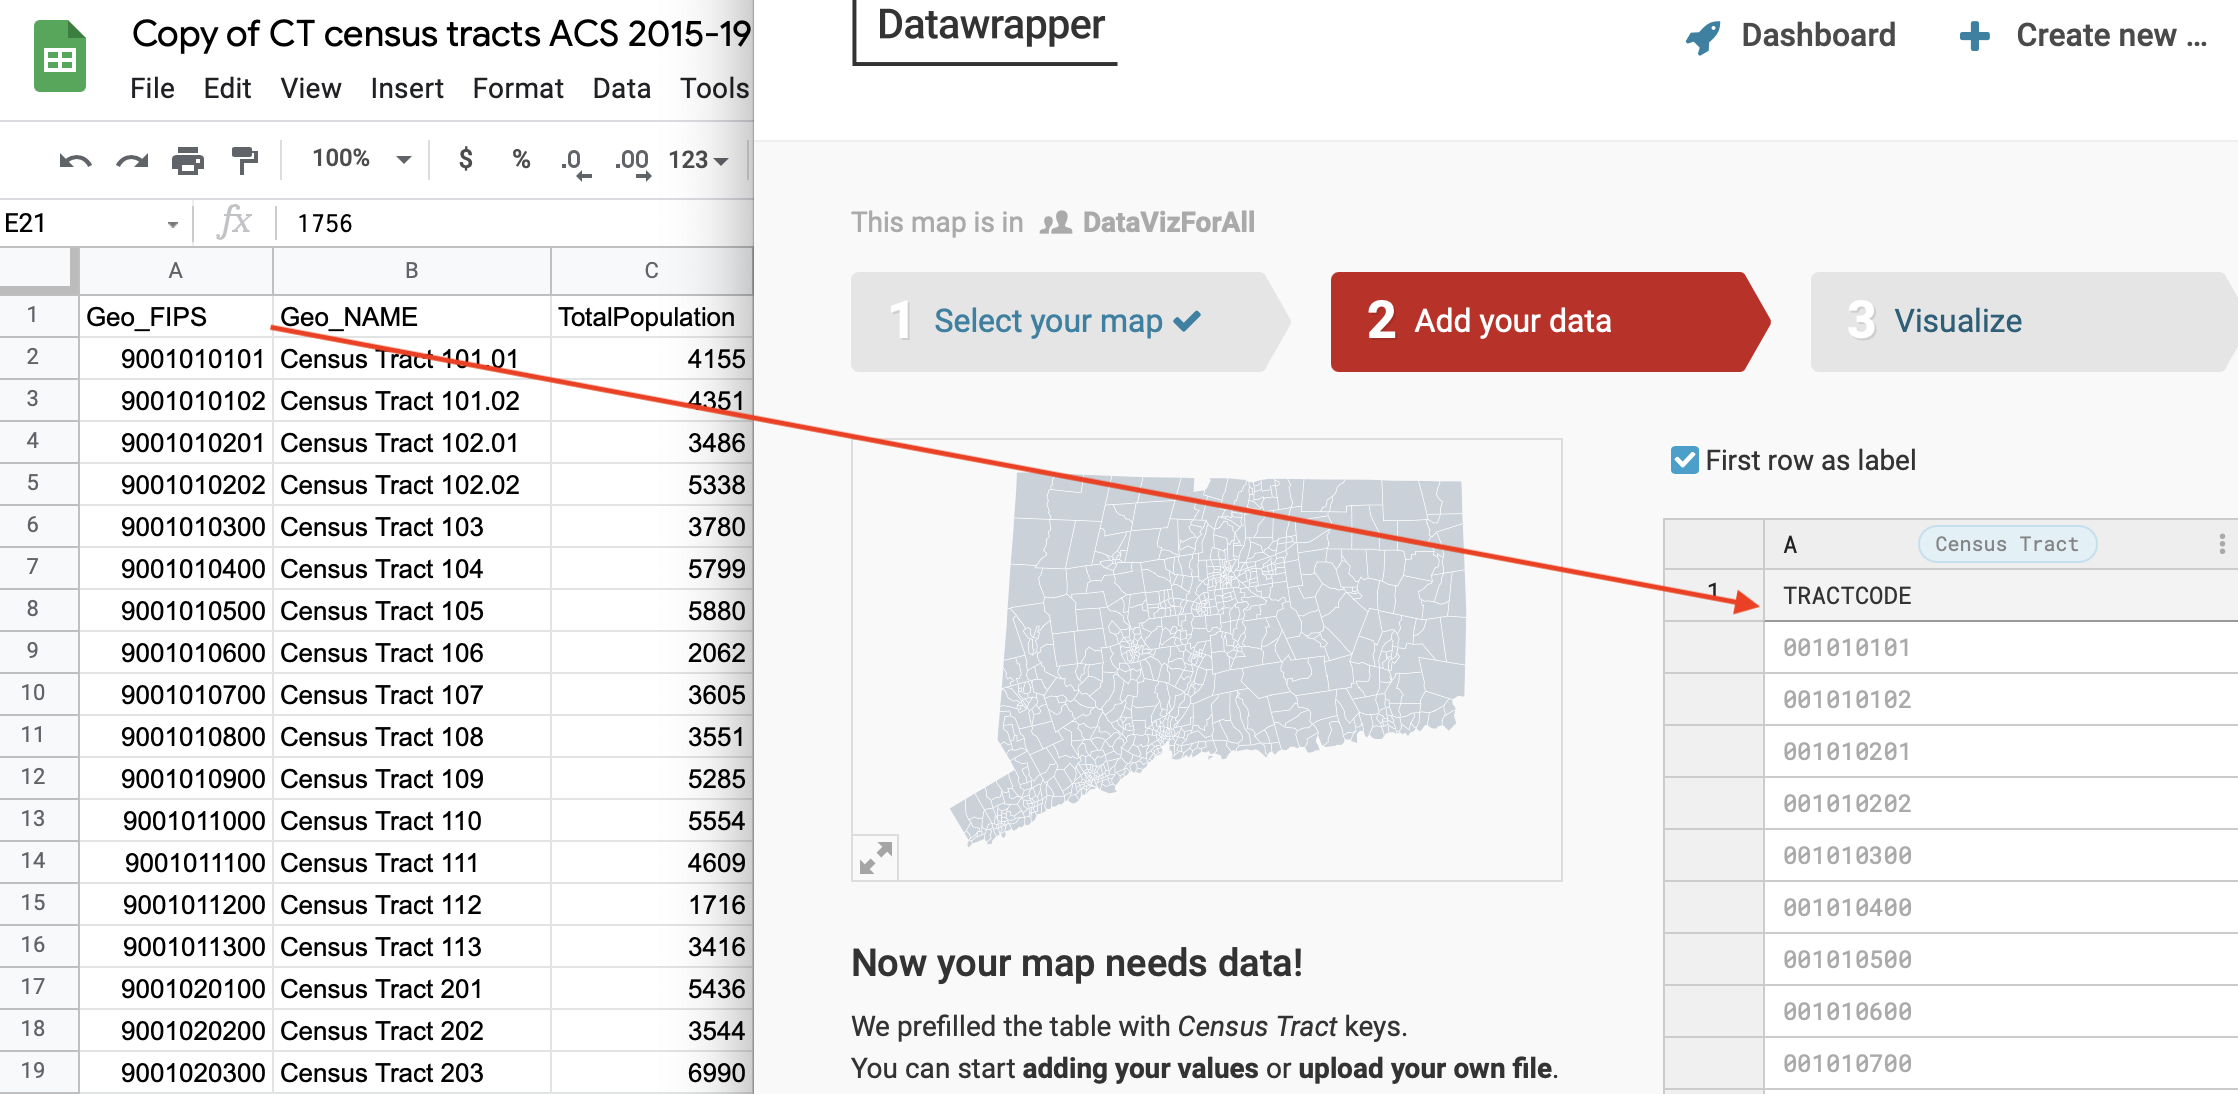 The census tract codes in the spreadsheet on the left do not match the codes in the mapping tool on the right.